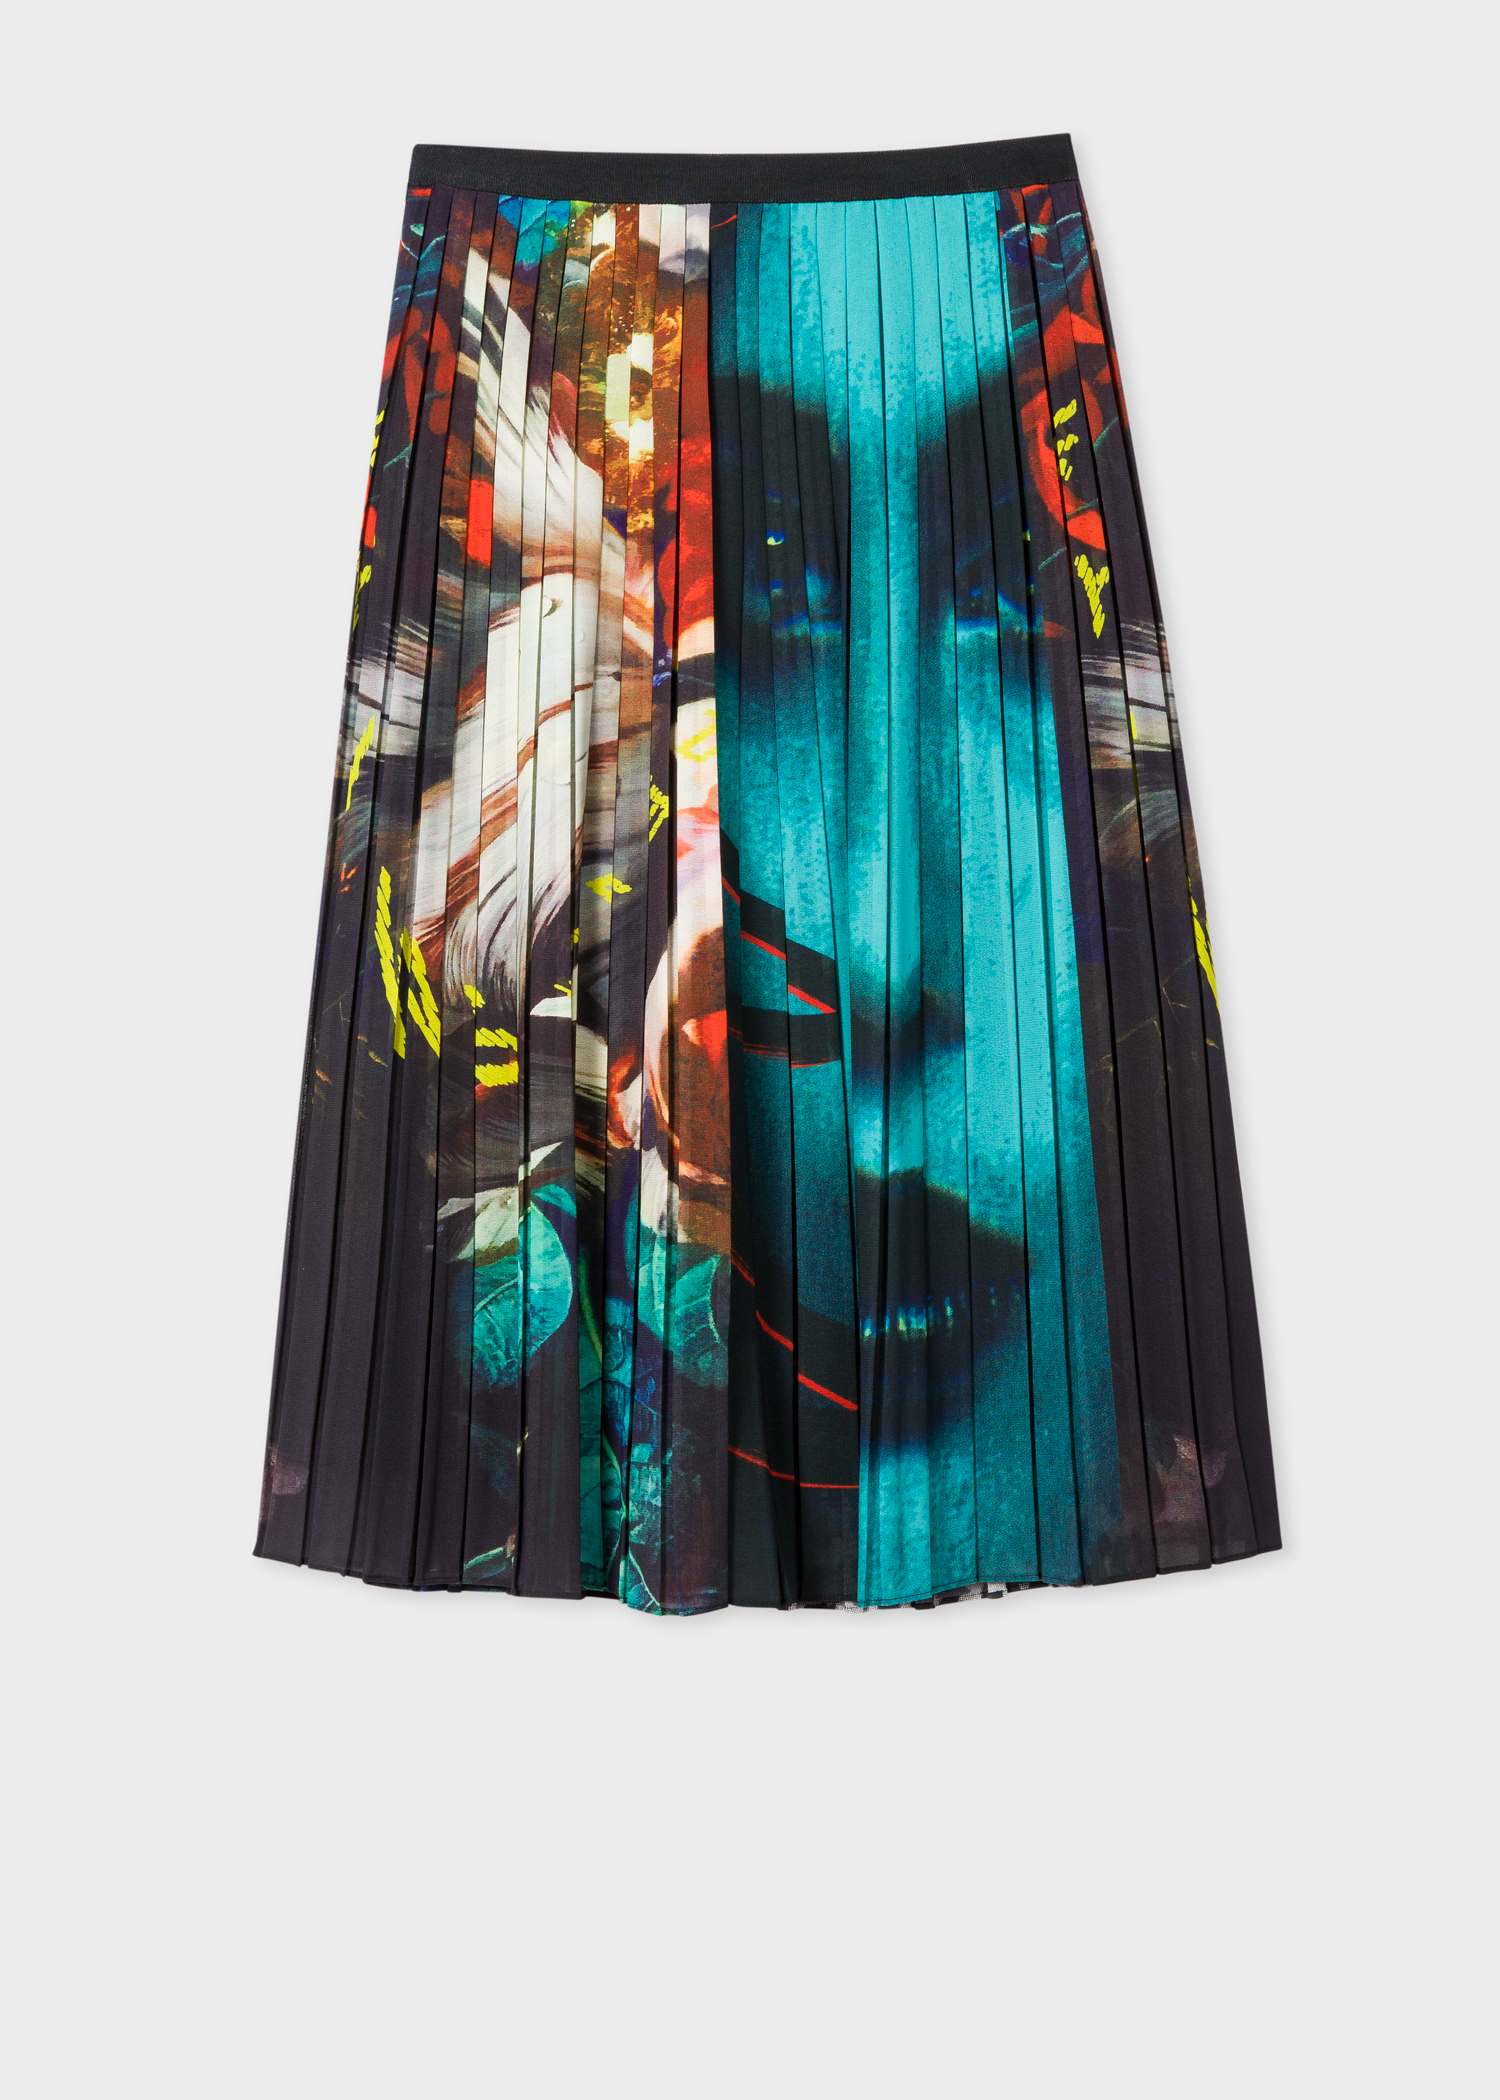 Back view - Women's Patchwork 'New Masters' Print Pleated Midi Skirt Paul Smith